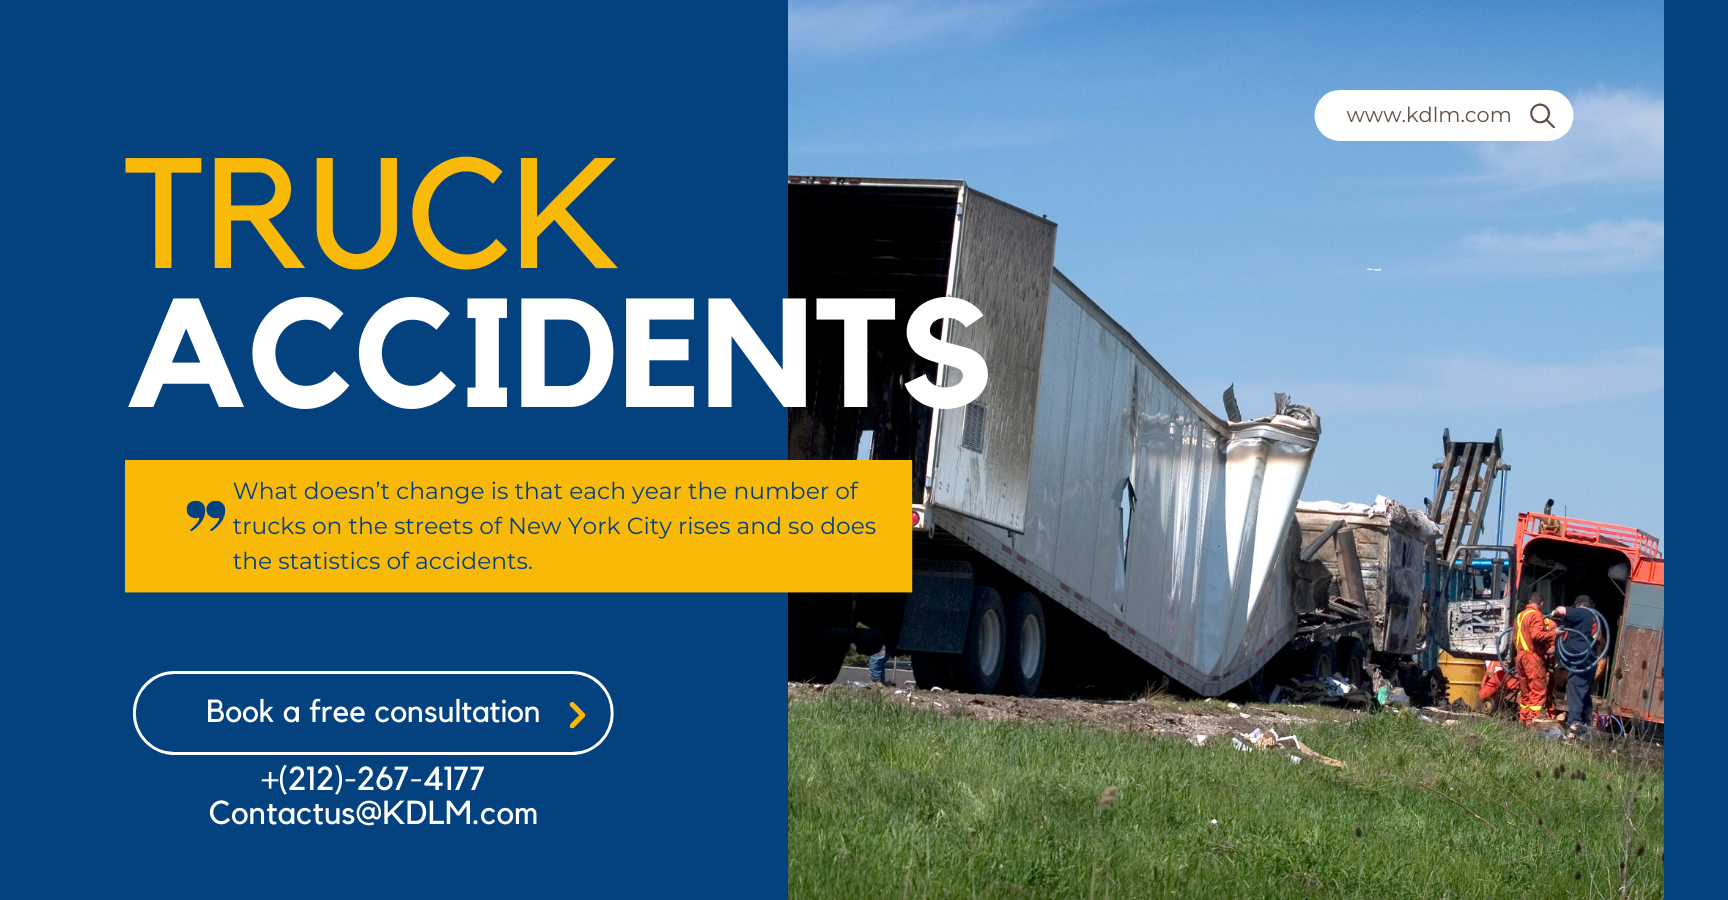 Truck Accidents feature image for KDLM